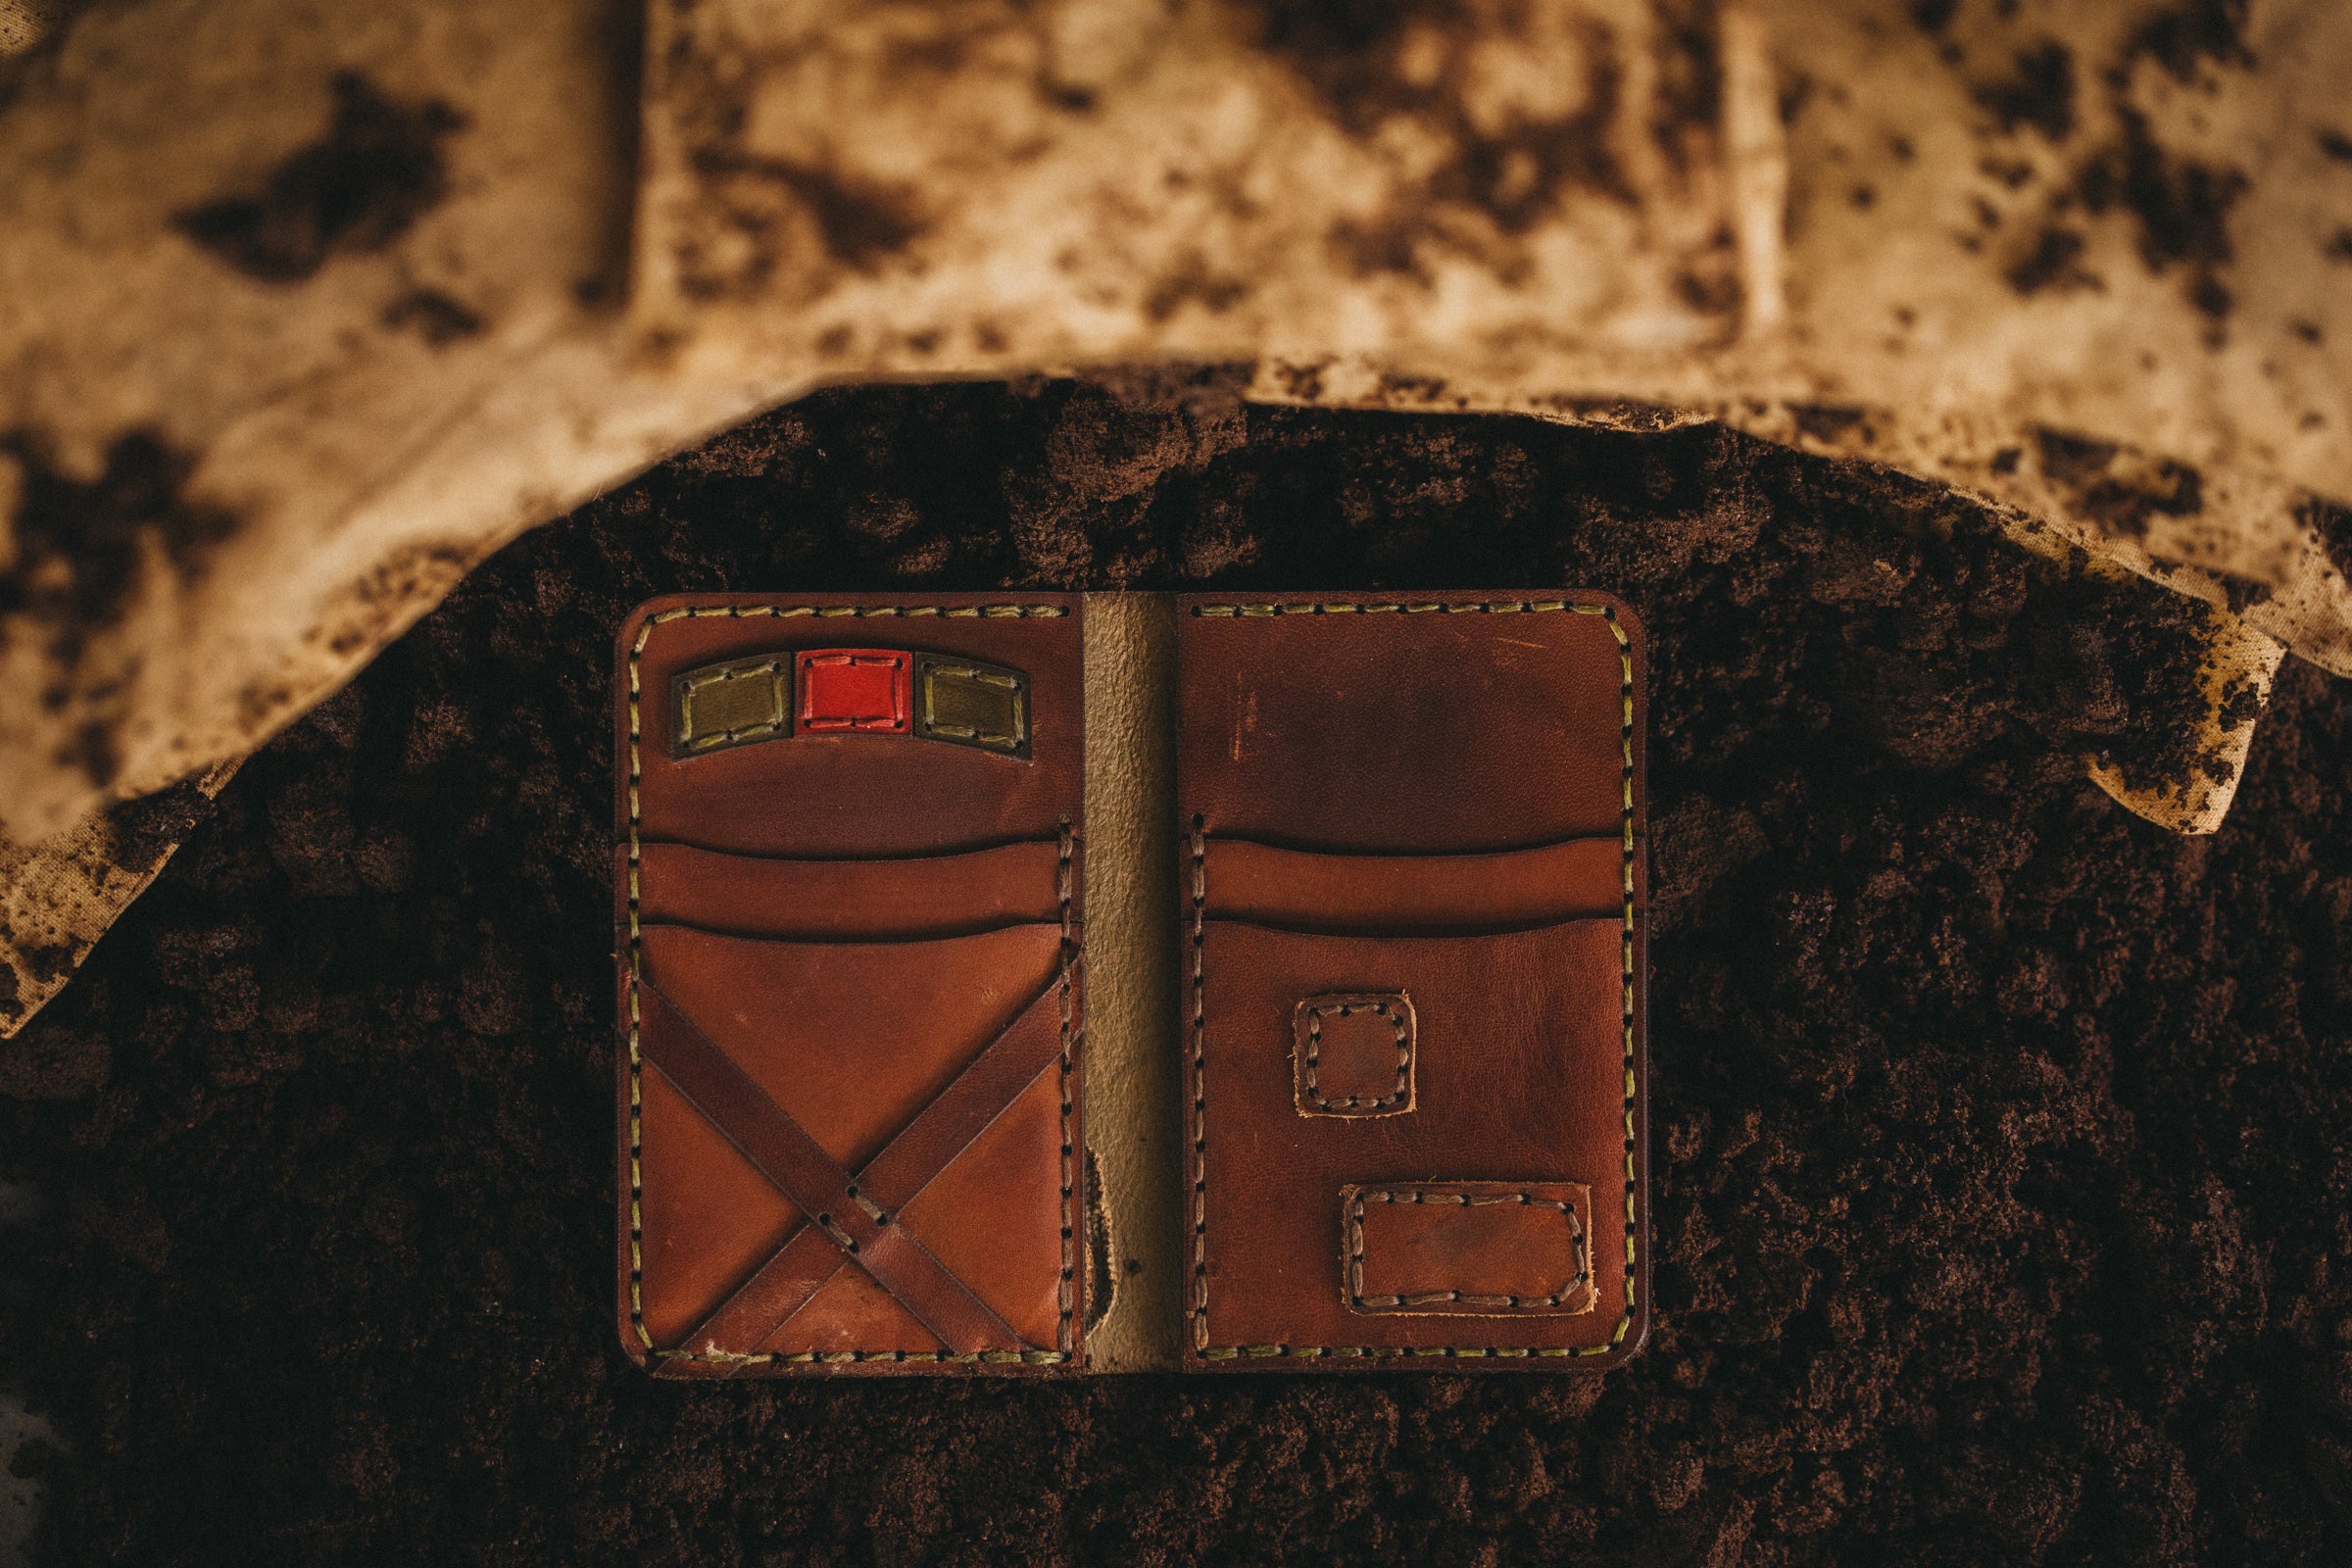 A military theme wallets sits on top of dirt with sand backs surrounding it.